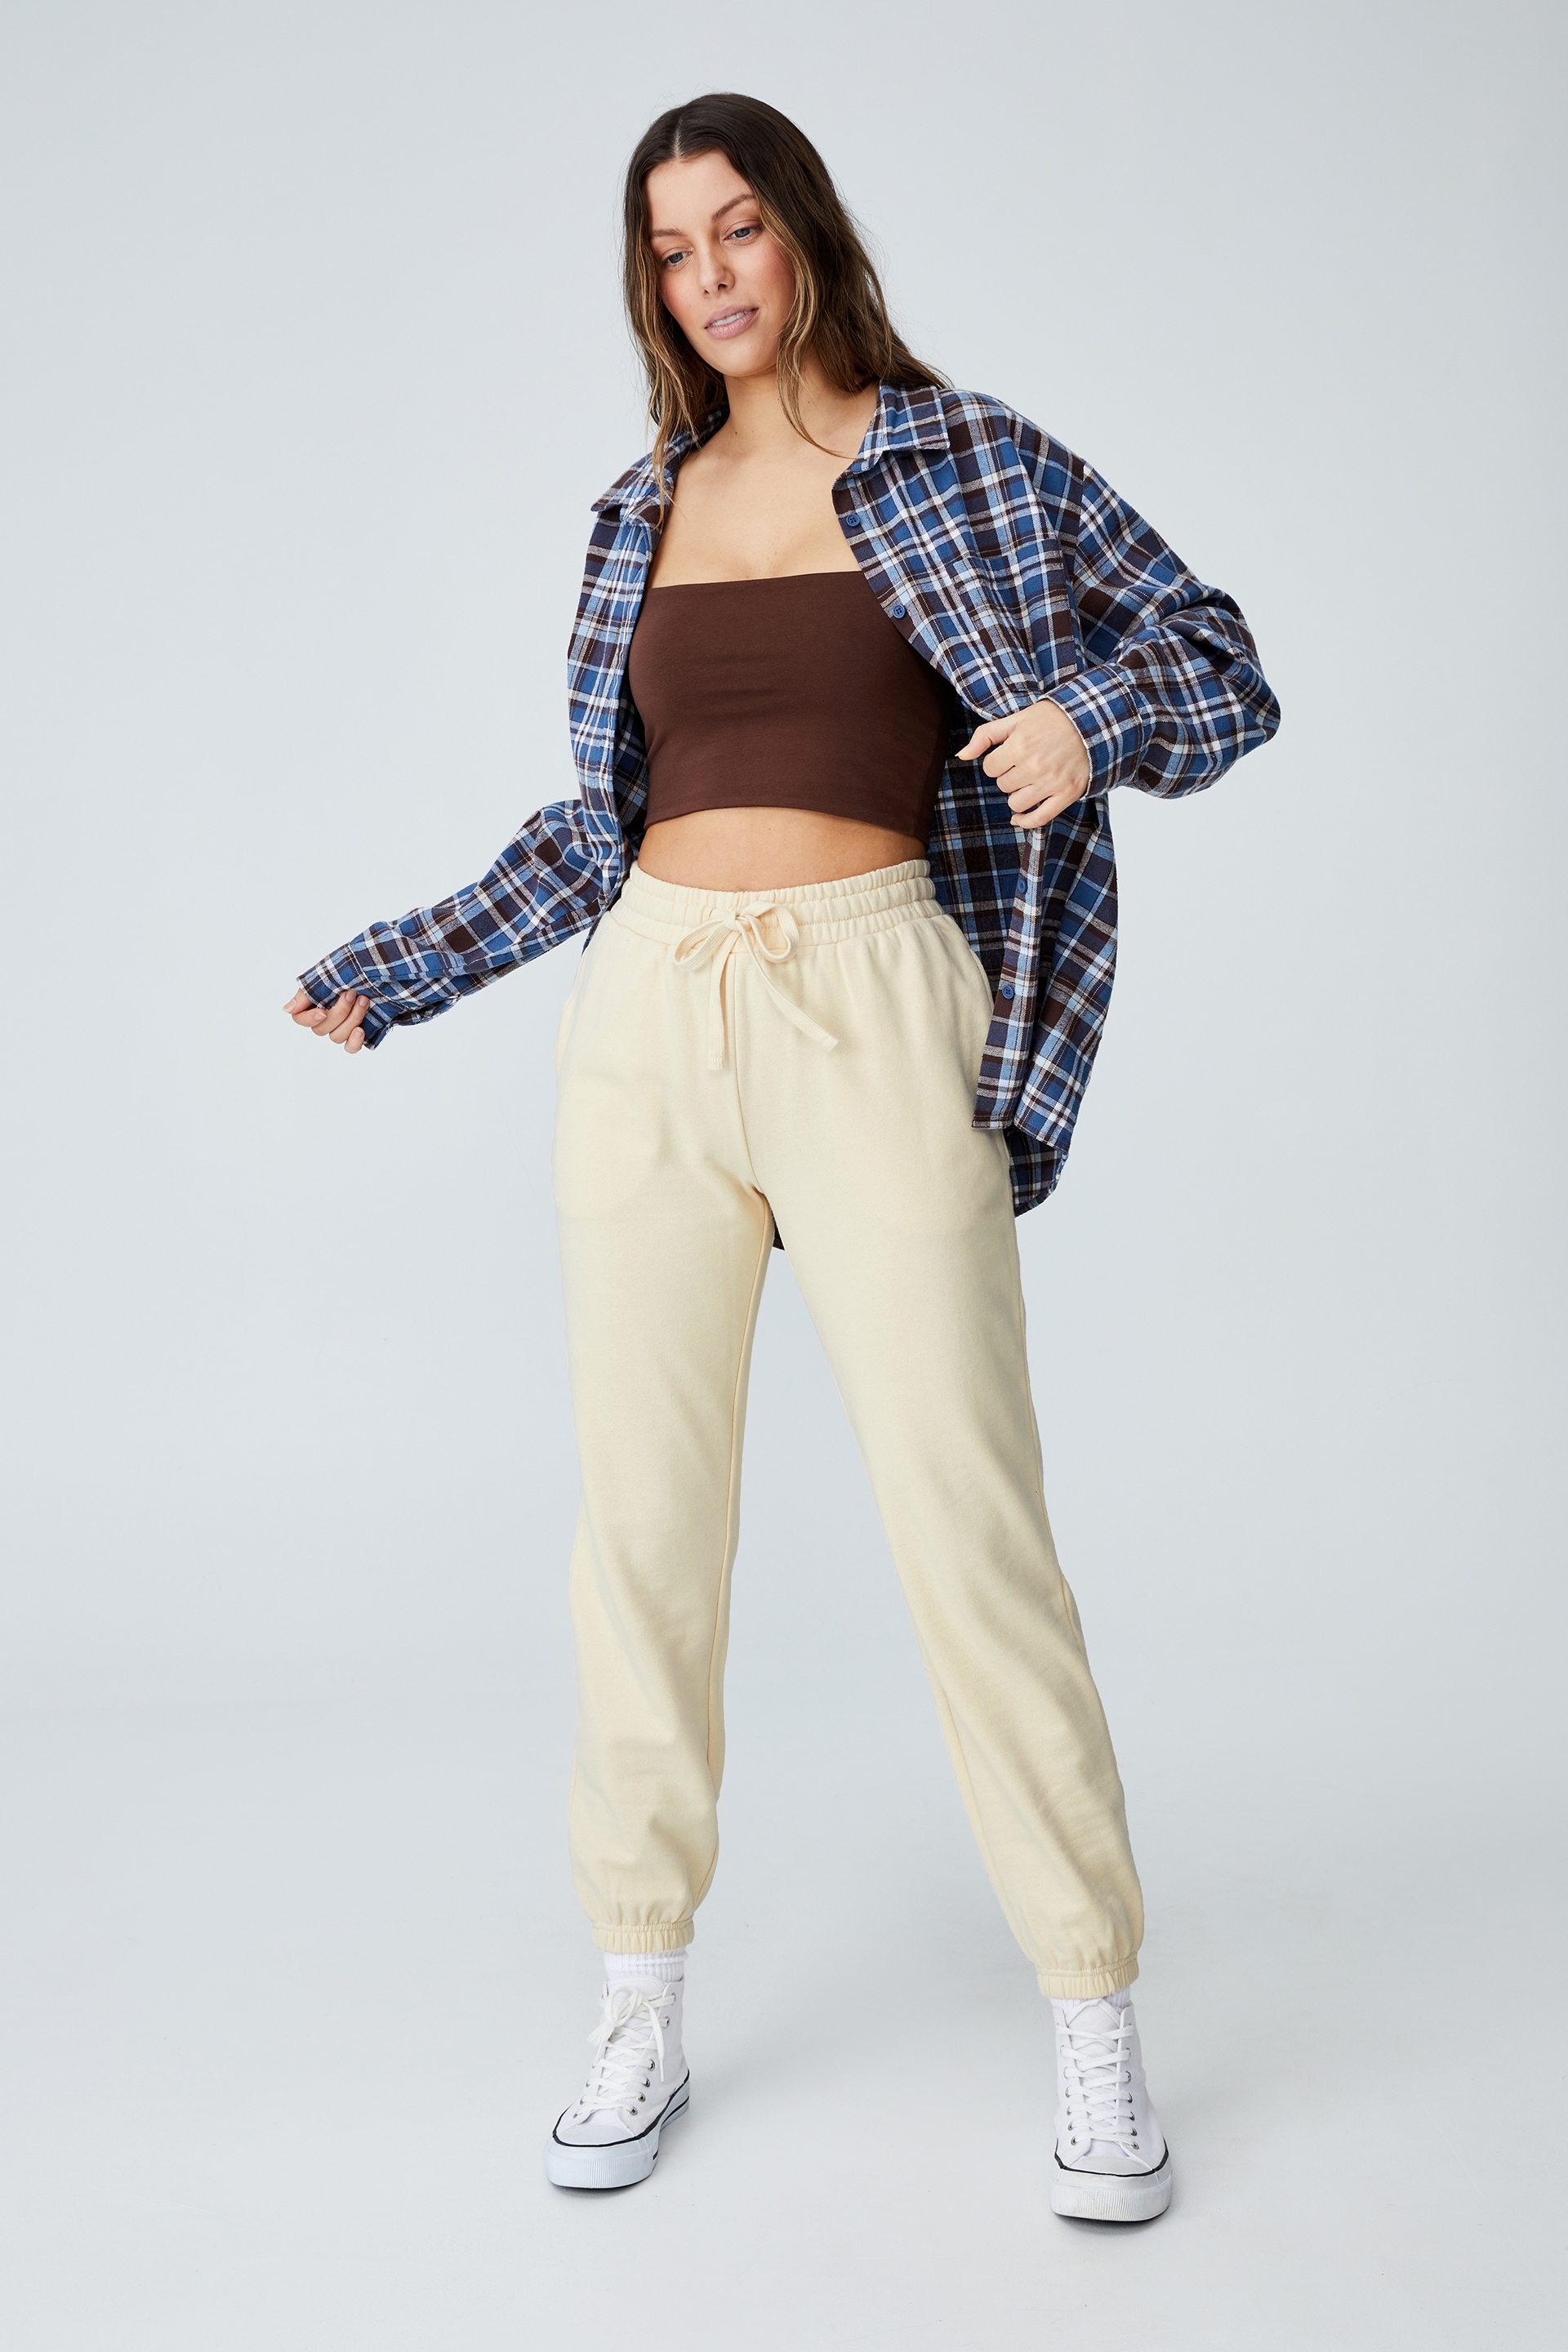 Cotton On Women - Freestyle Trackpant - Buttermilk